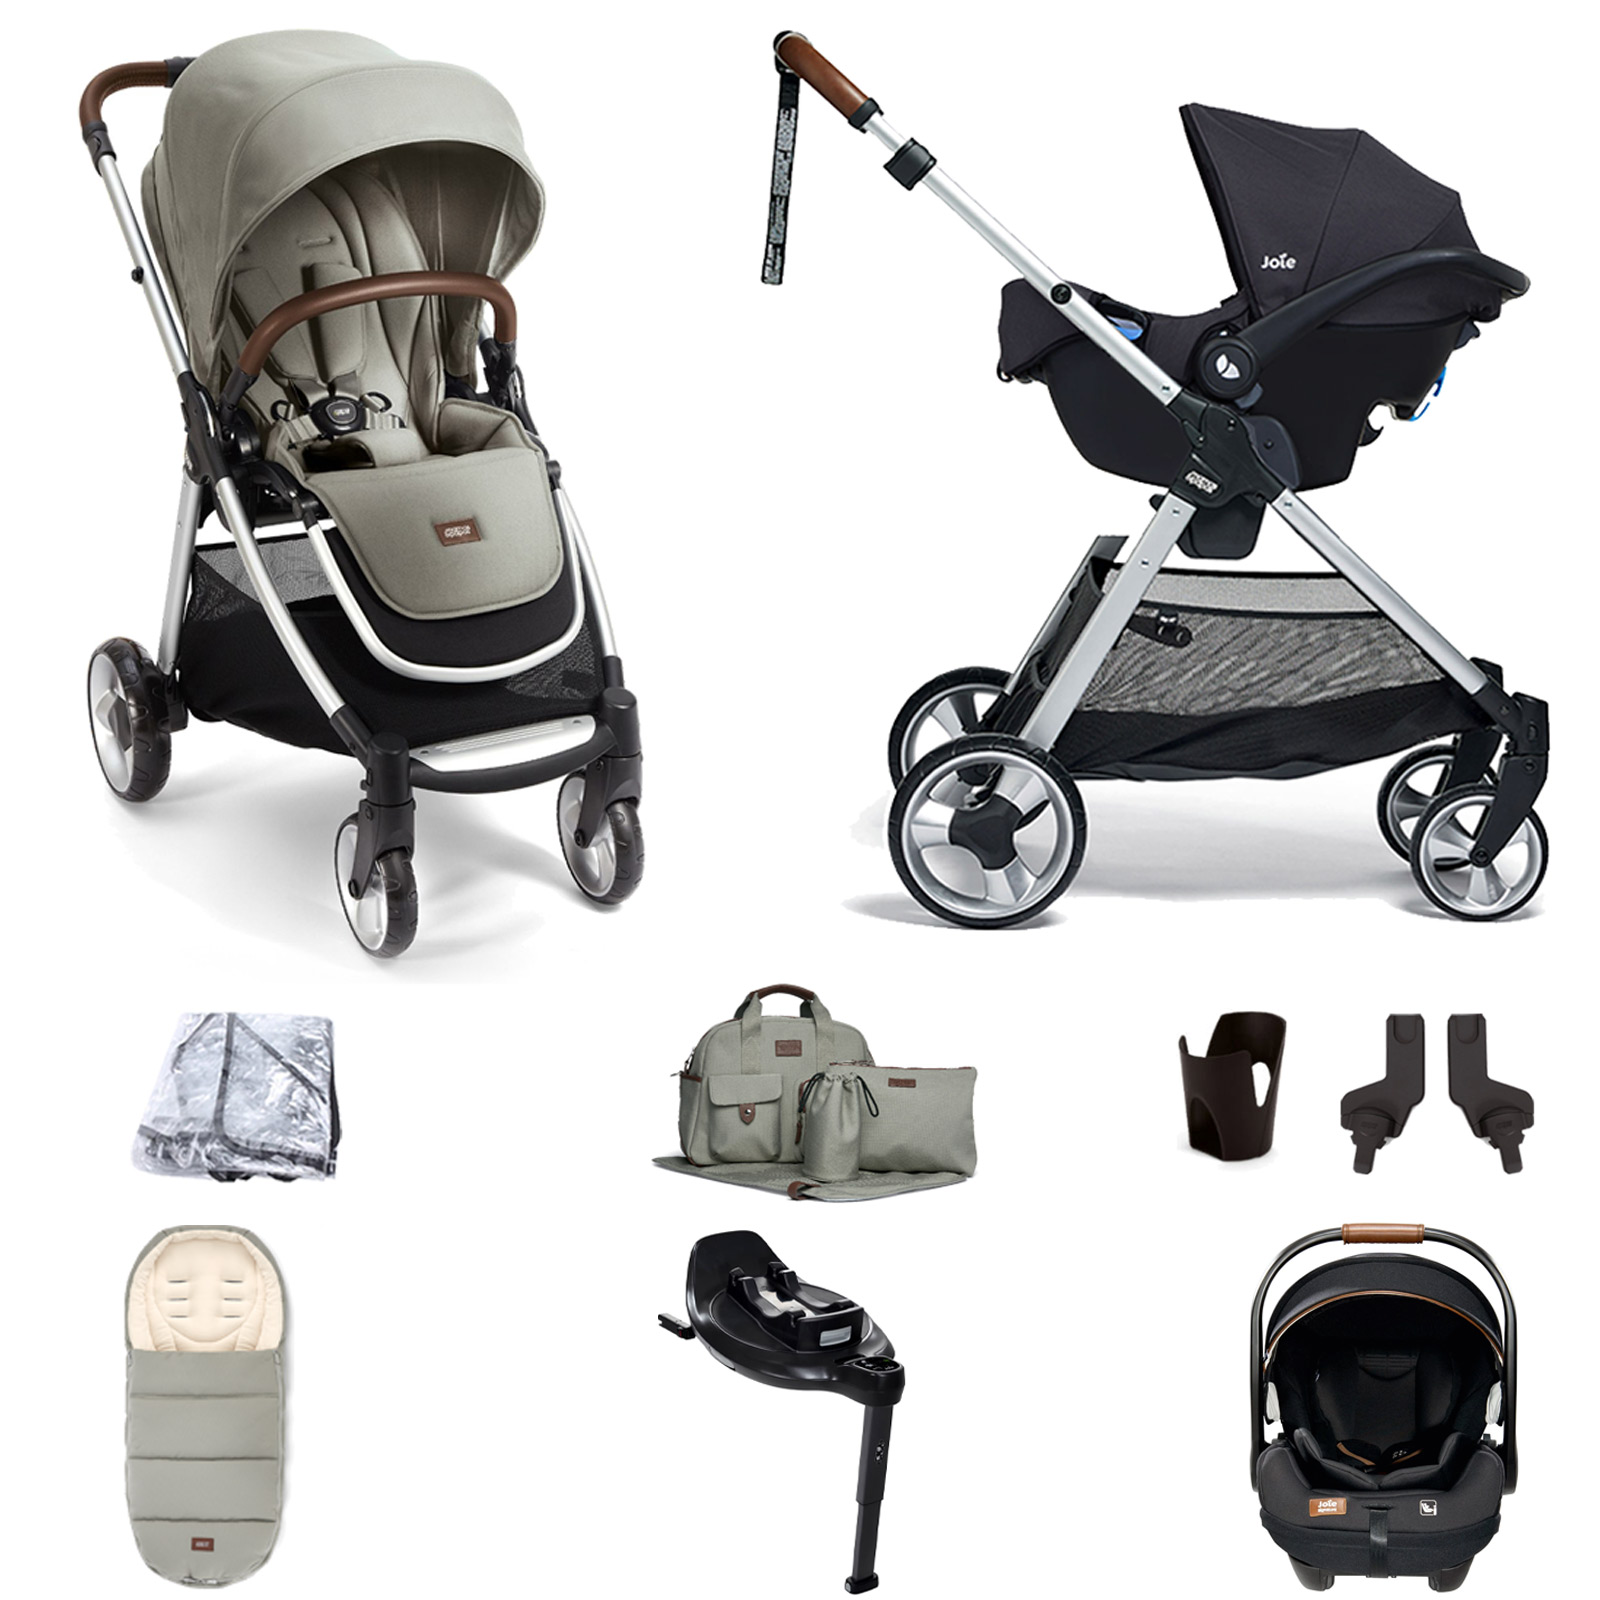 Mamas & Papas Flip XT2 Travel System with Accessories, i-Level Recline Car Seat & i-Base Encore - Sage Green